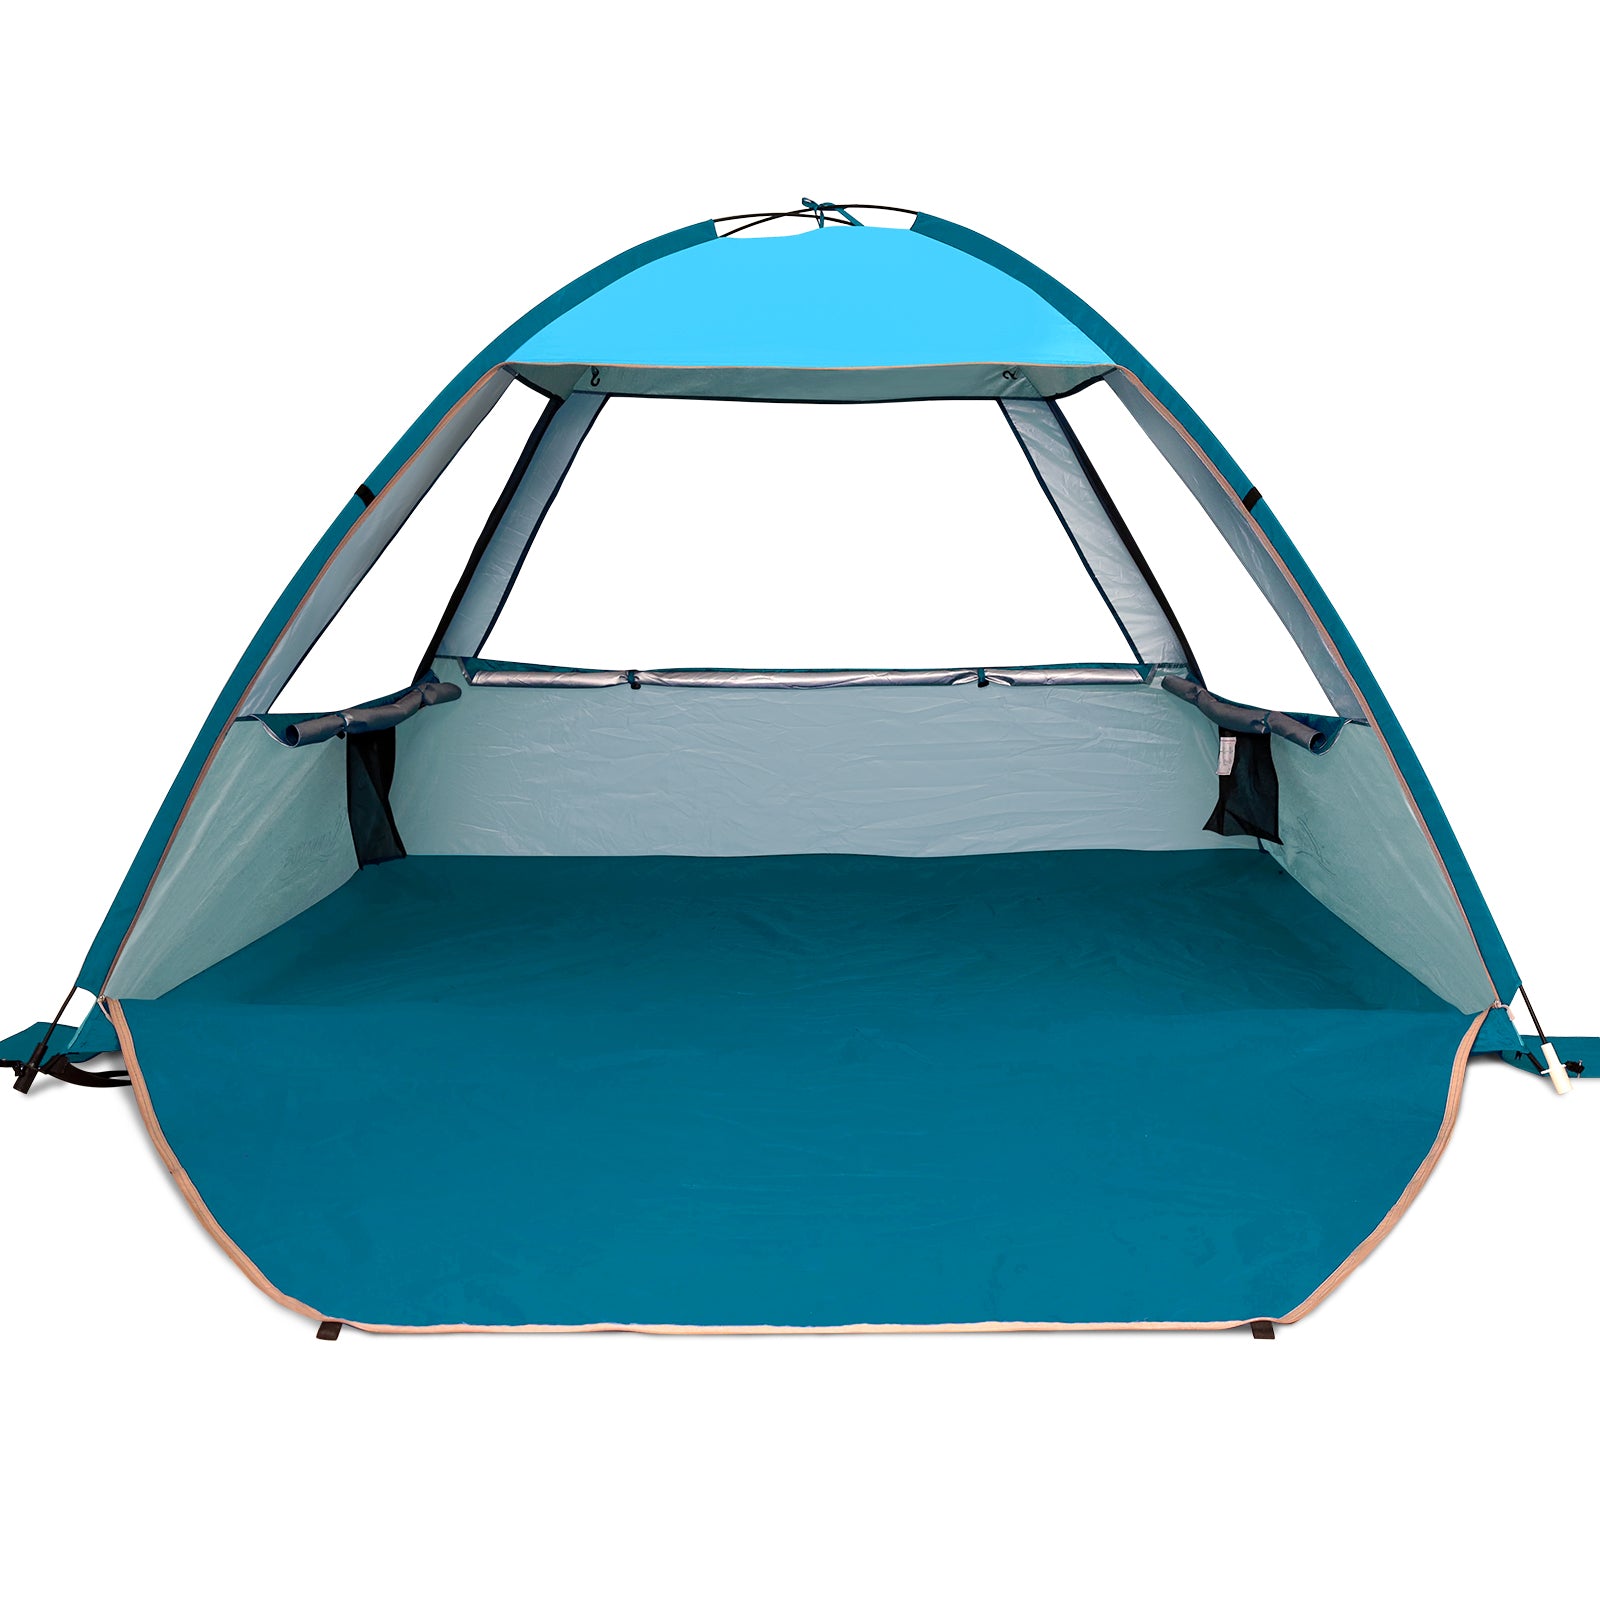 Extra Large Pop Up Beach Tent for 4 Person, Automatic Beach Shelter for Family